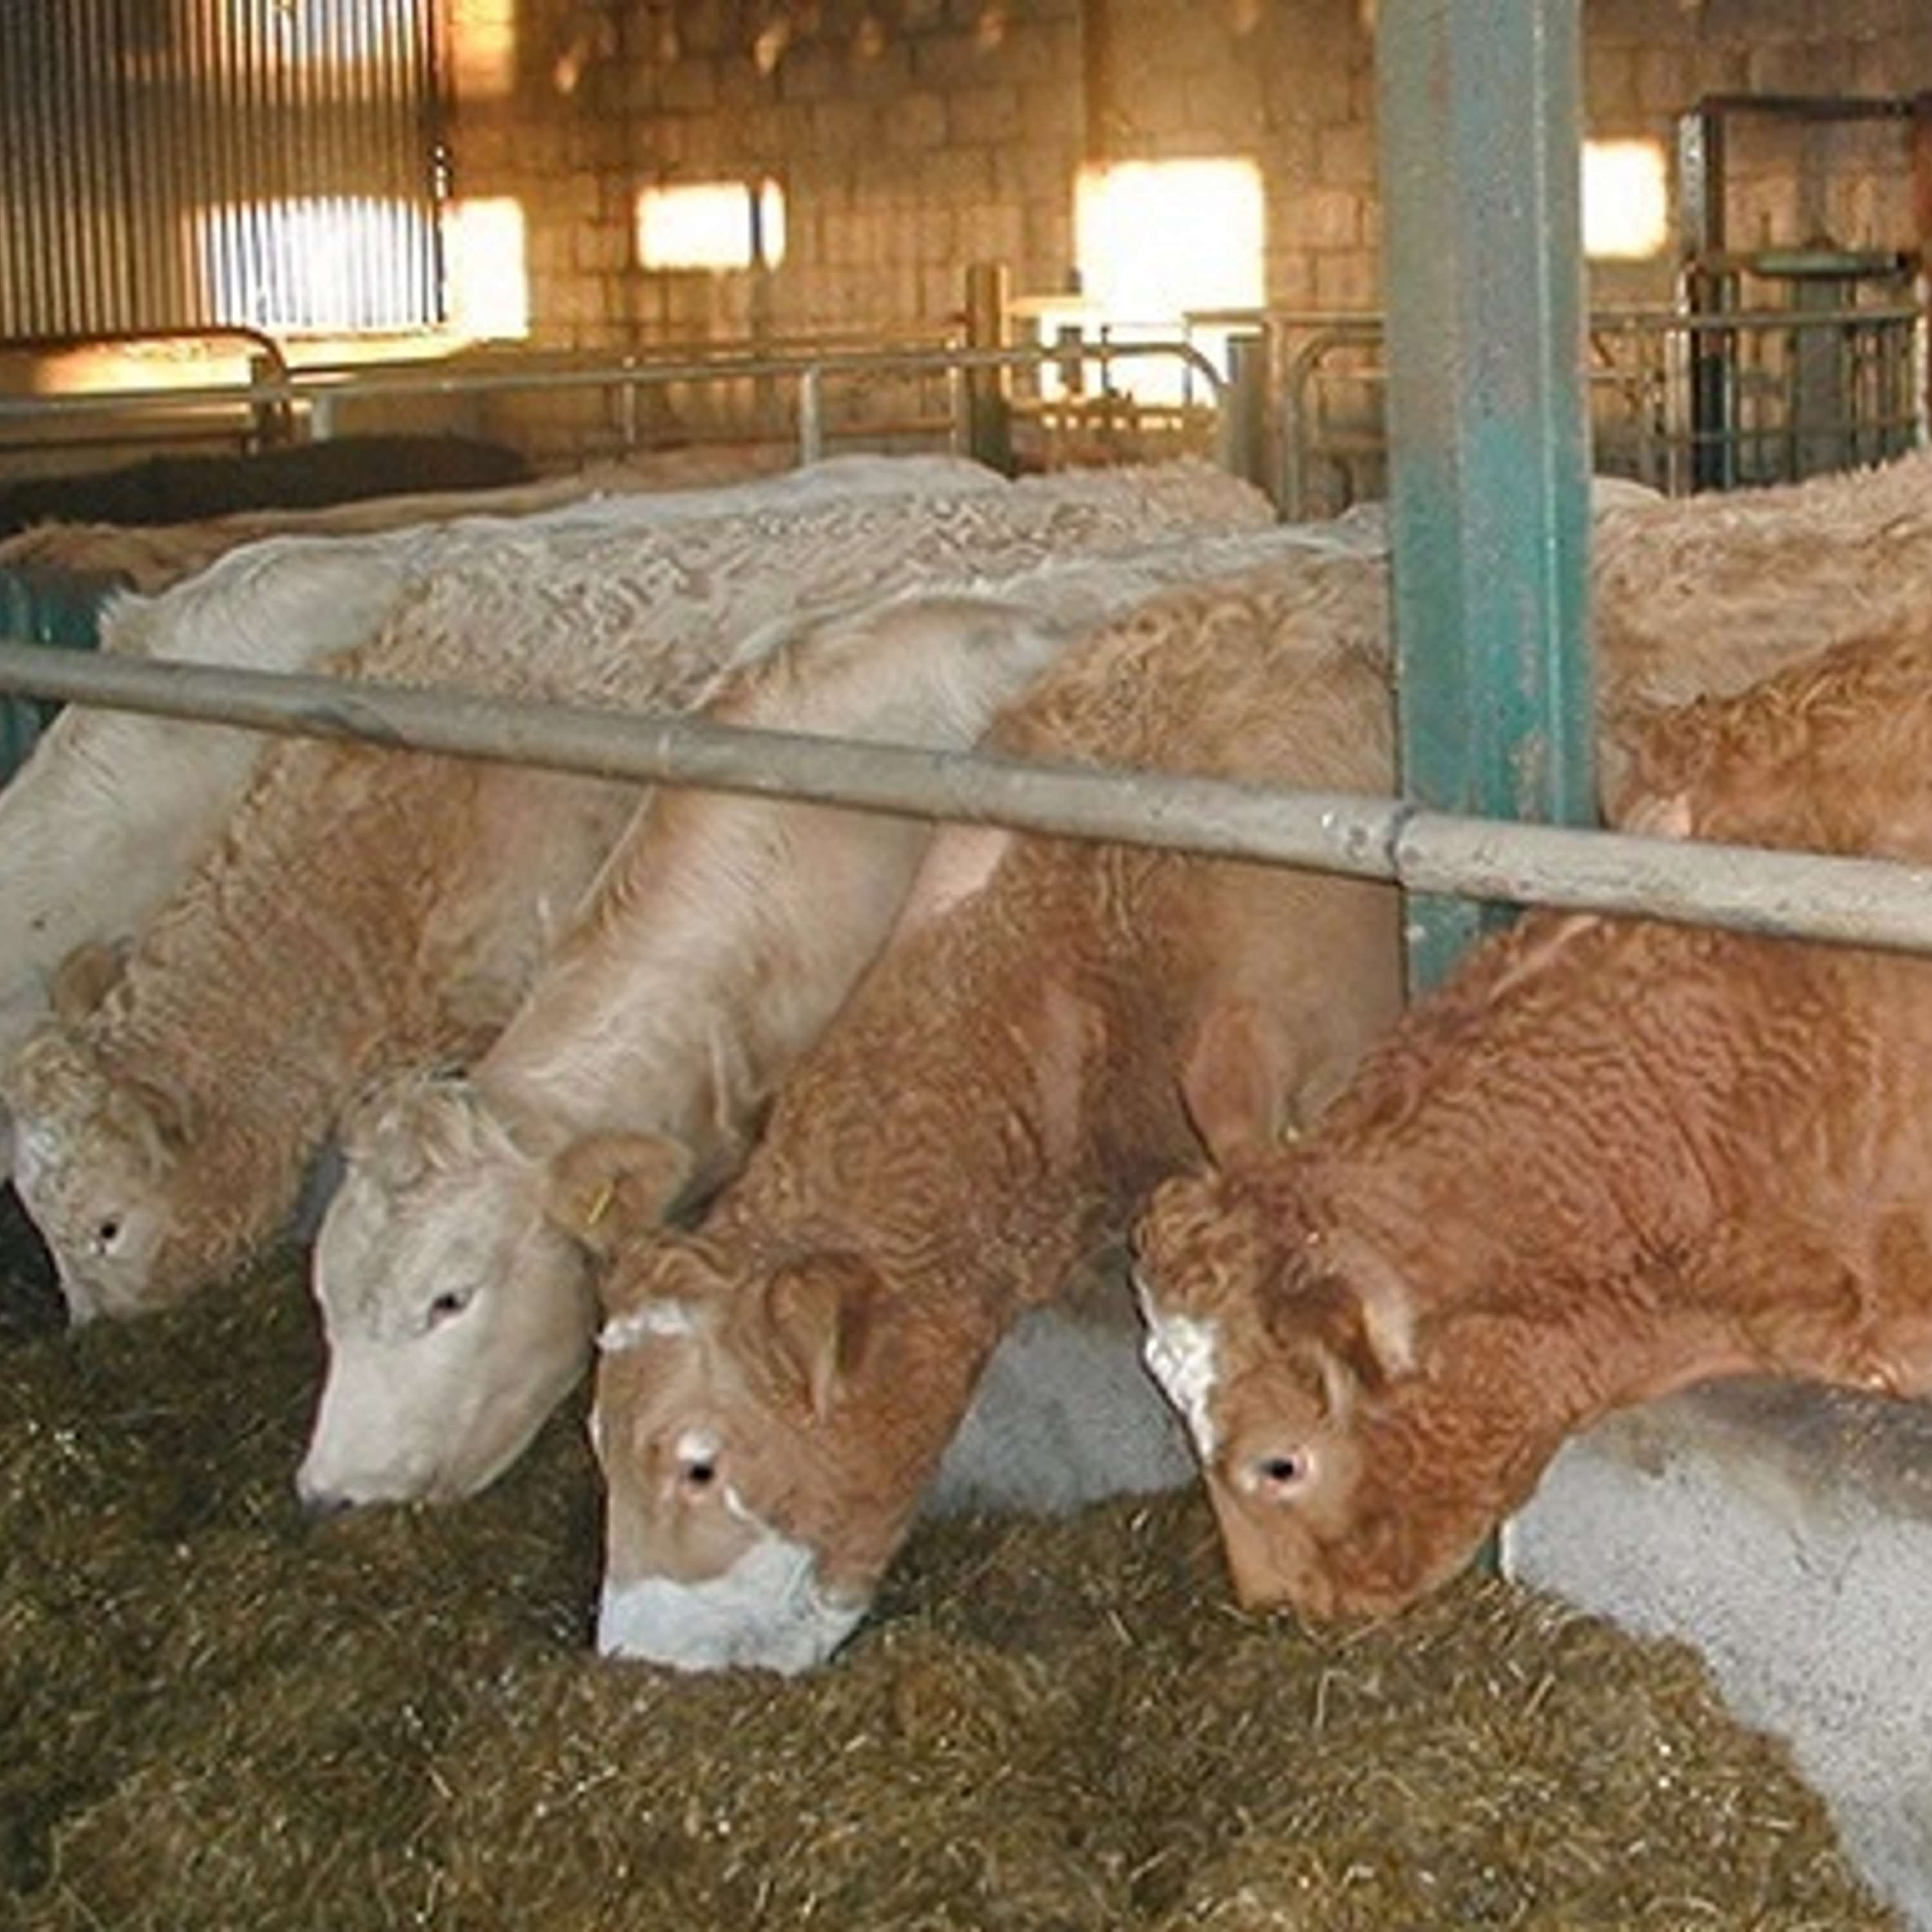 How to manage nutrition with high feed costs this winter